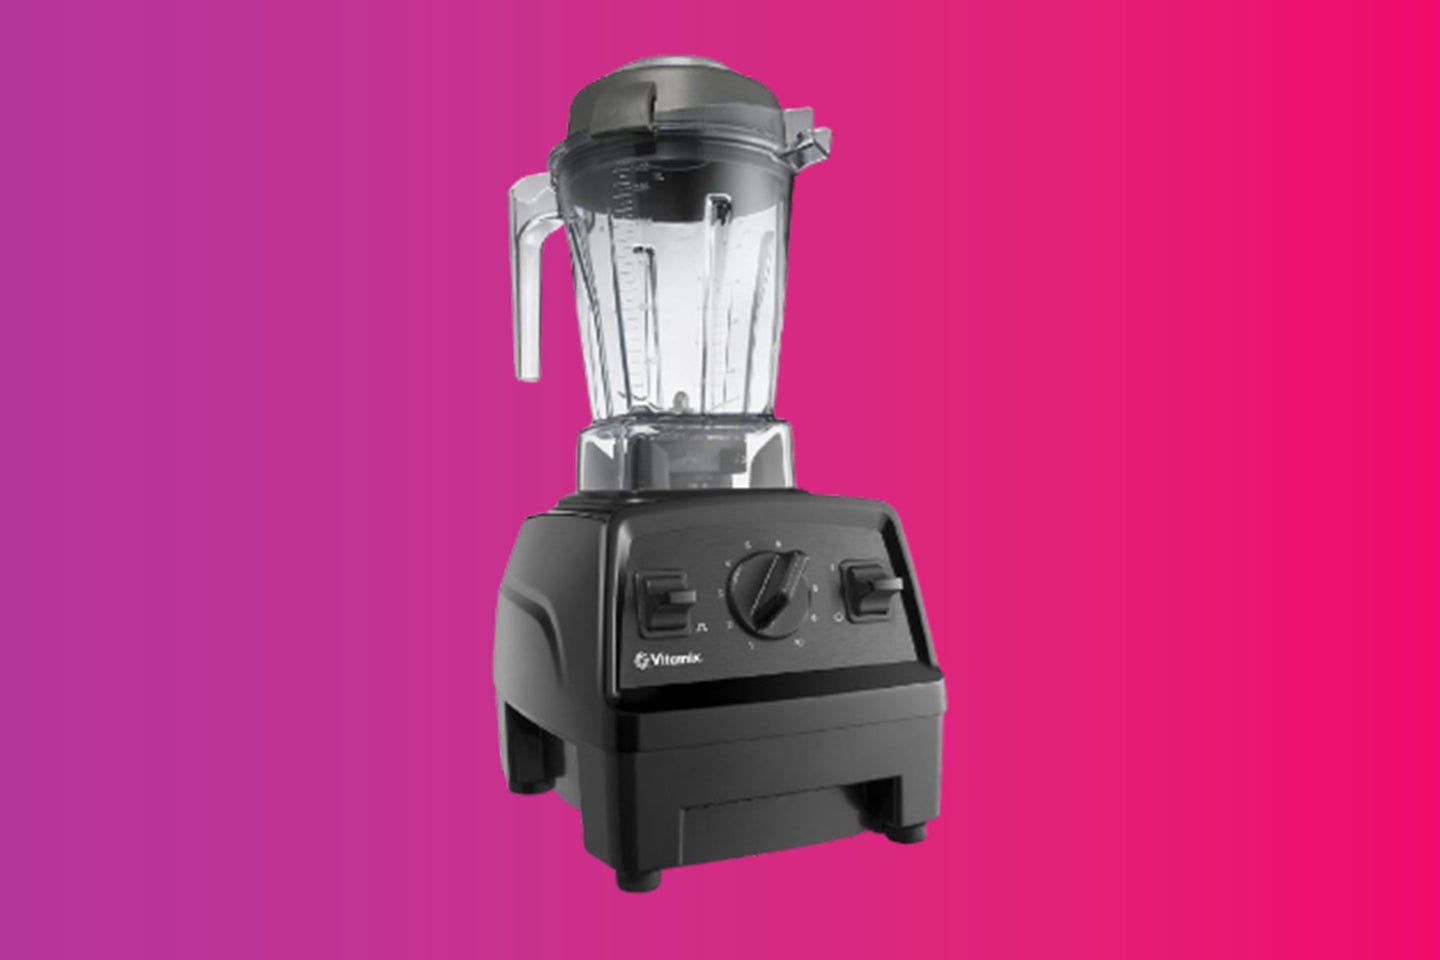 A Vitamix blender on a purple and pink gradient background